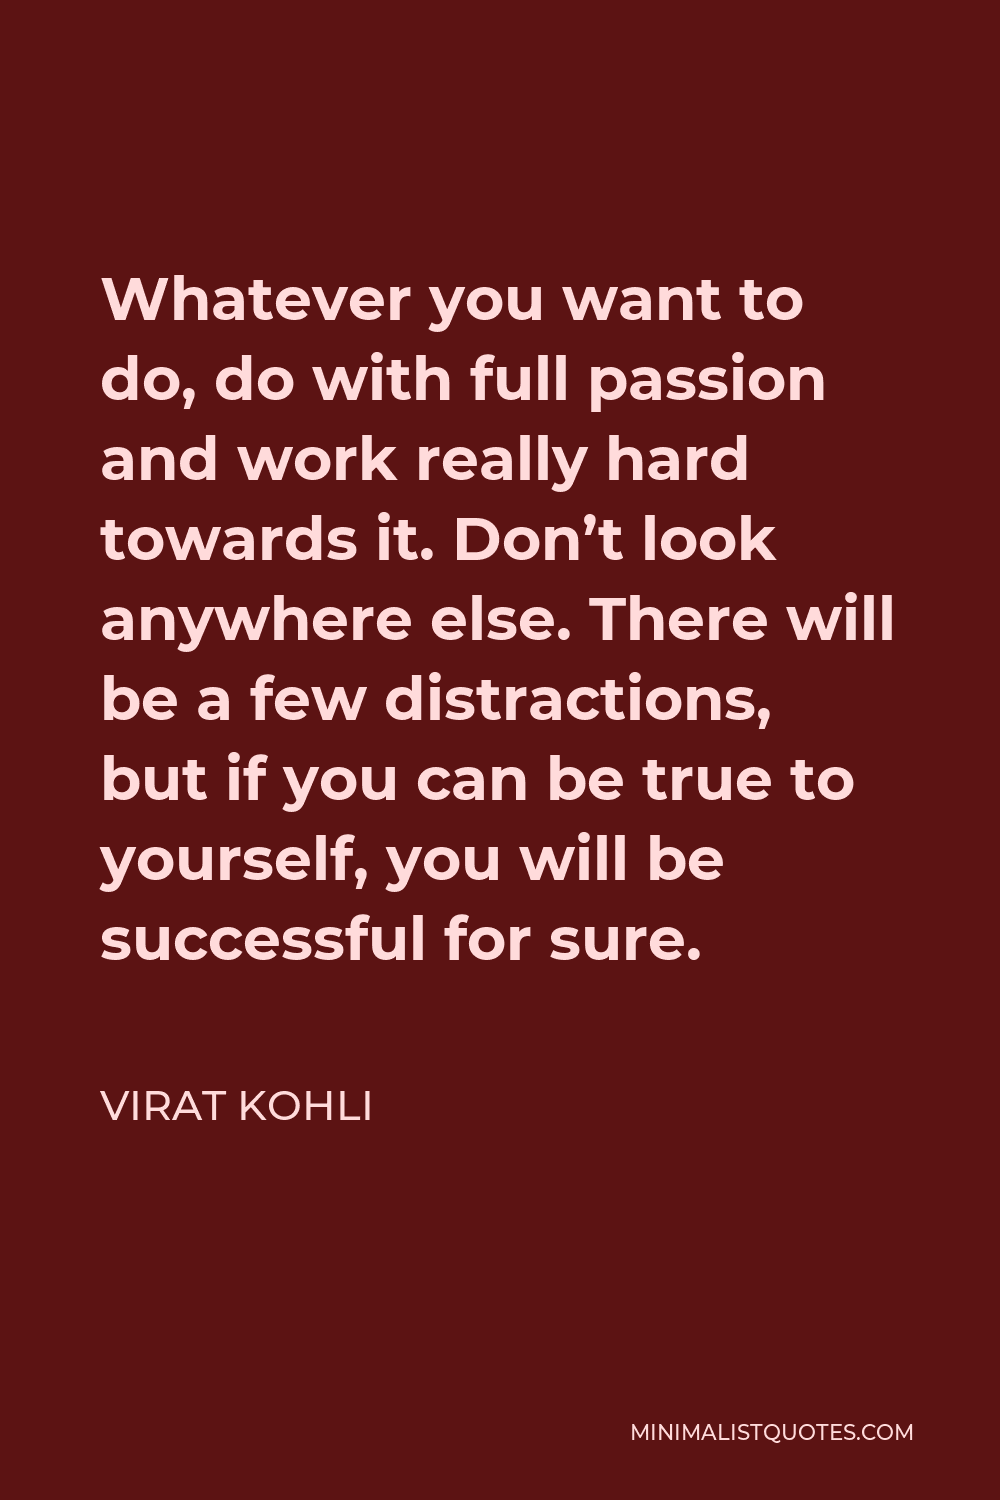 Virat Kohli Quote - Whatever you want to do, do with full passion and work really hard towards it. Don’t look anywhere else. There will be a few distractions, but if you can be true to yourself, you will be successful for sure.